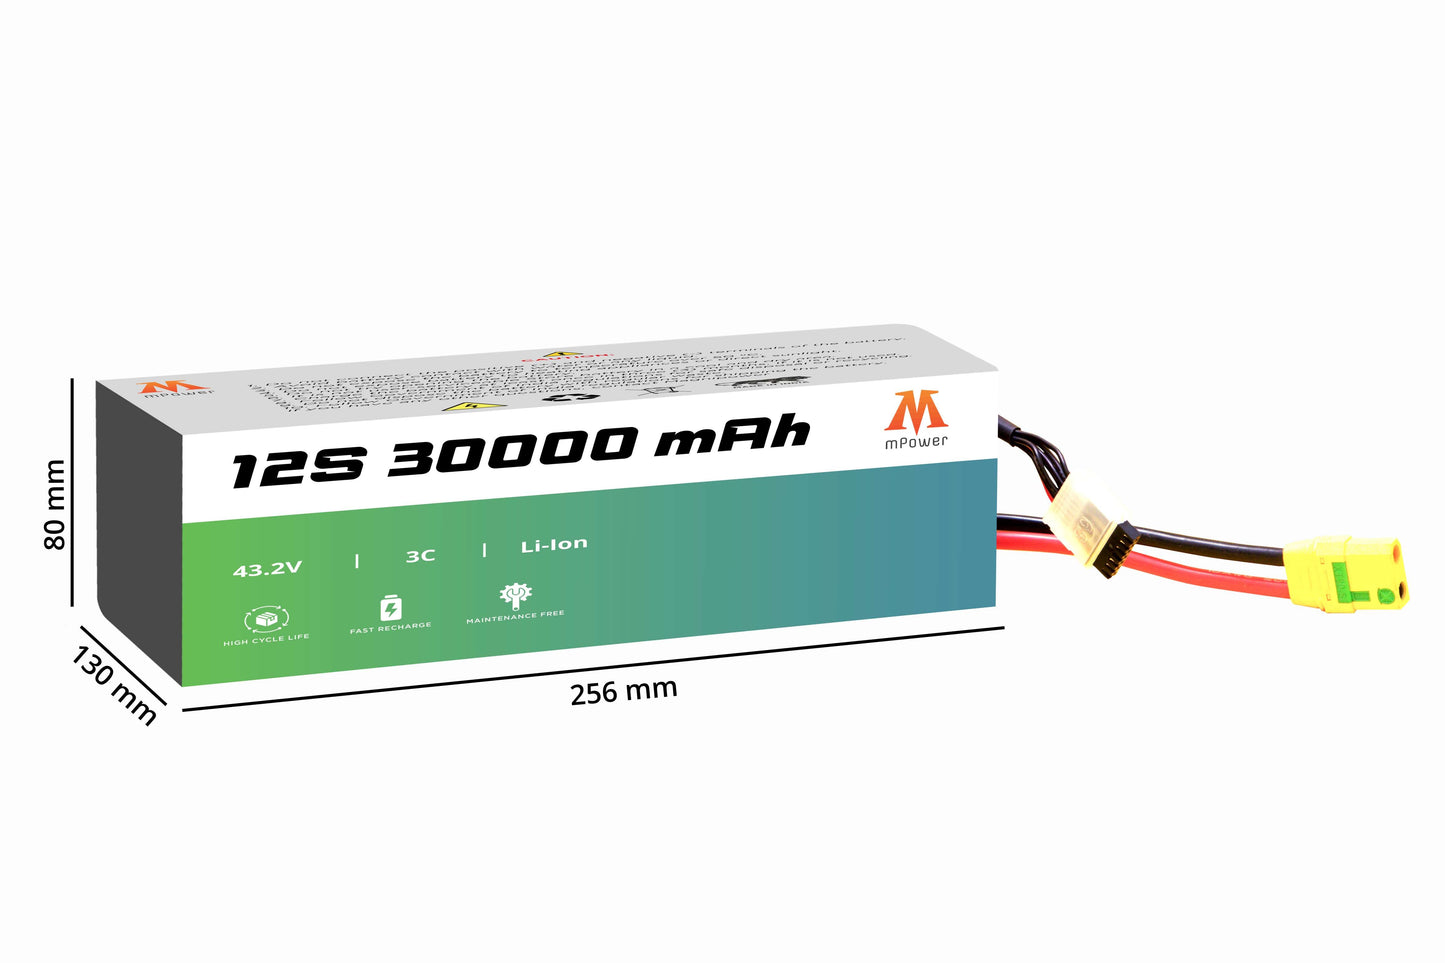 mPower 12S 30000mAh Lithium-Ion Battery for mapping Drones